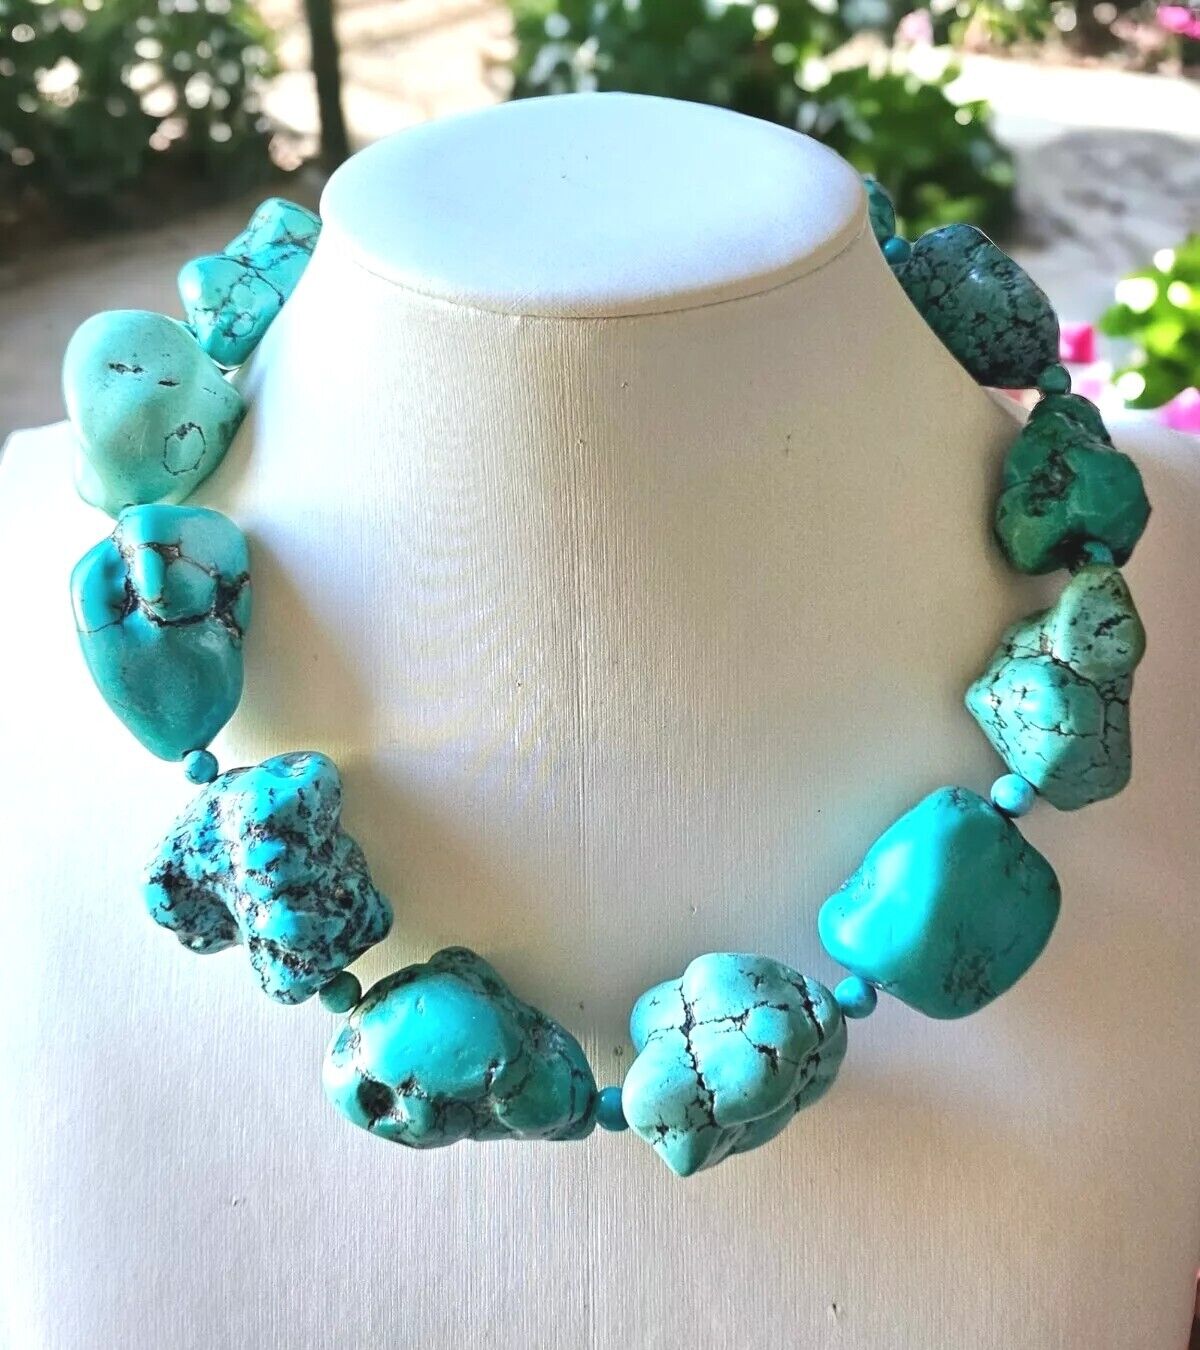 🔥 Vintage KENNETH JAY LANE 1980s TURQUOISE Choker STATEMENT NECKLACE 